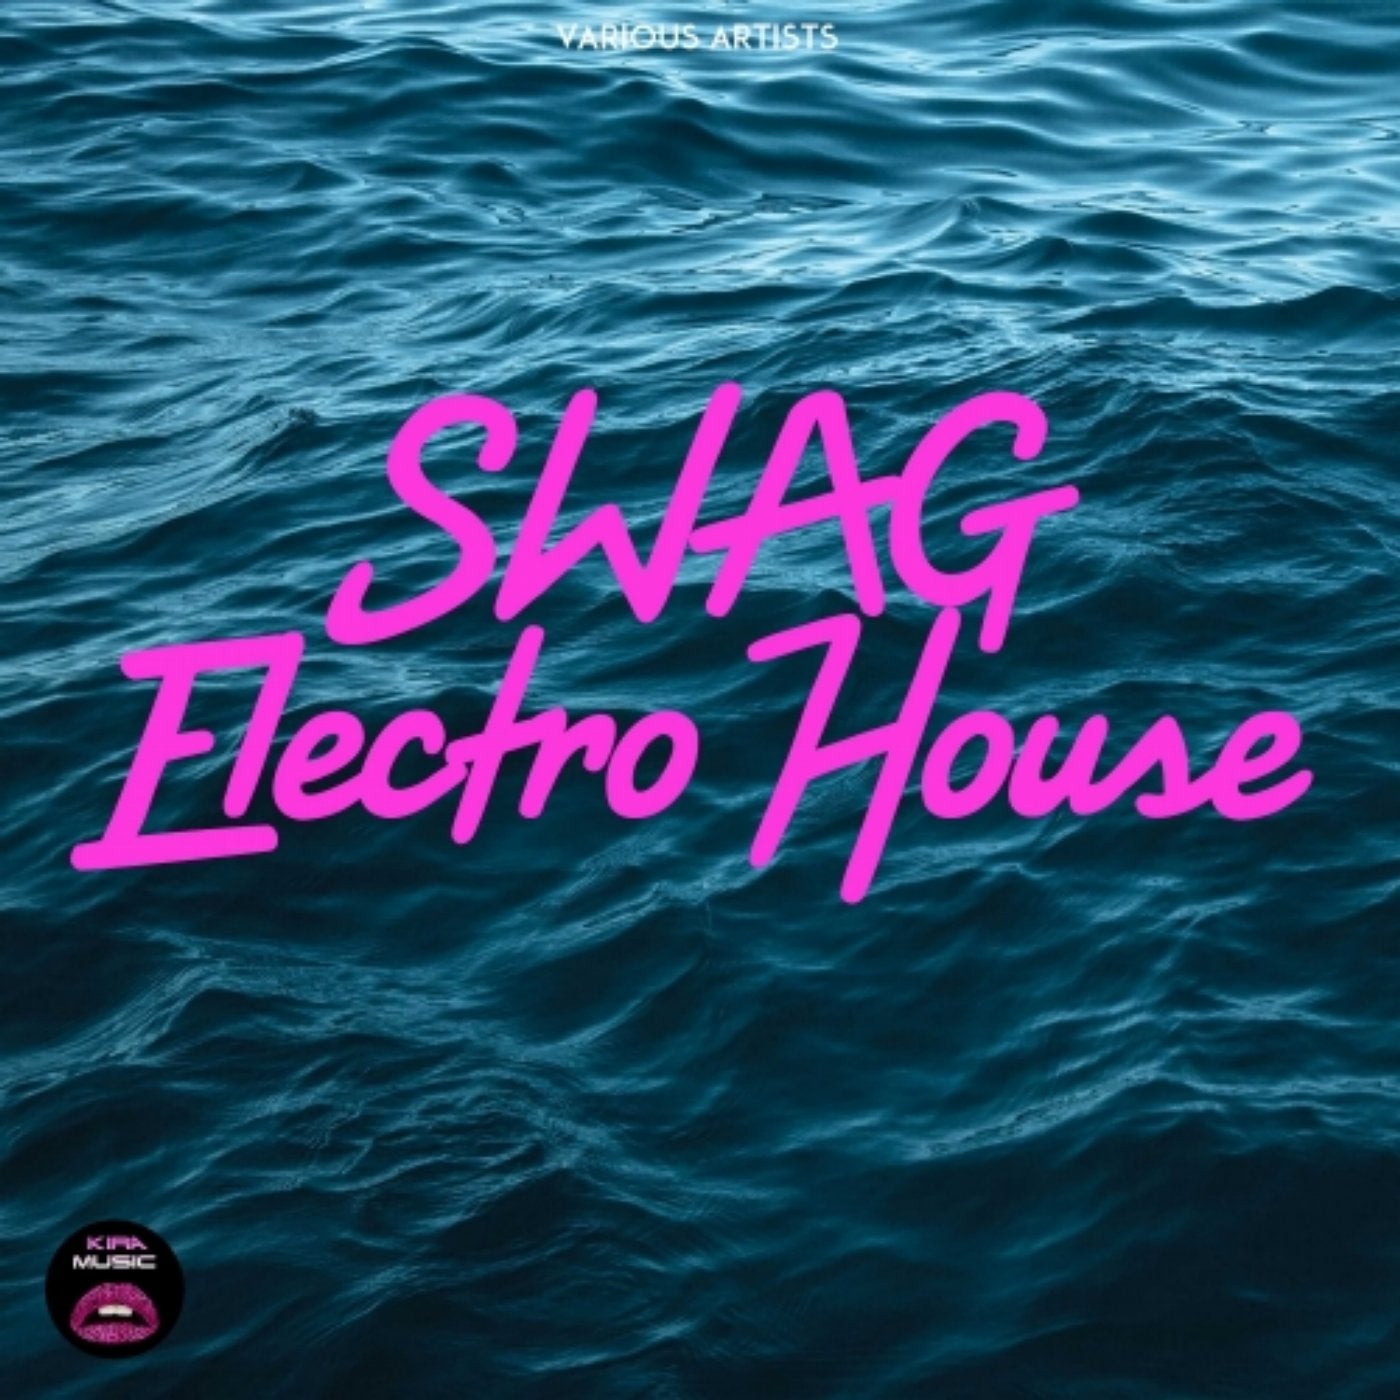 SWAG Electro House